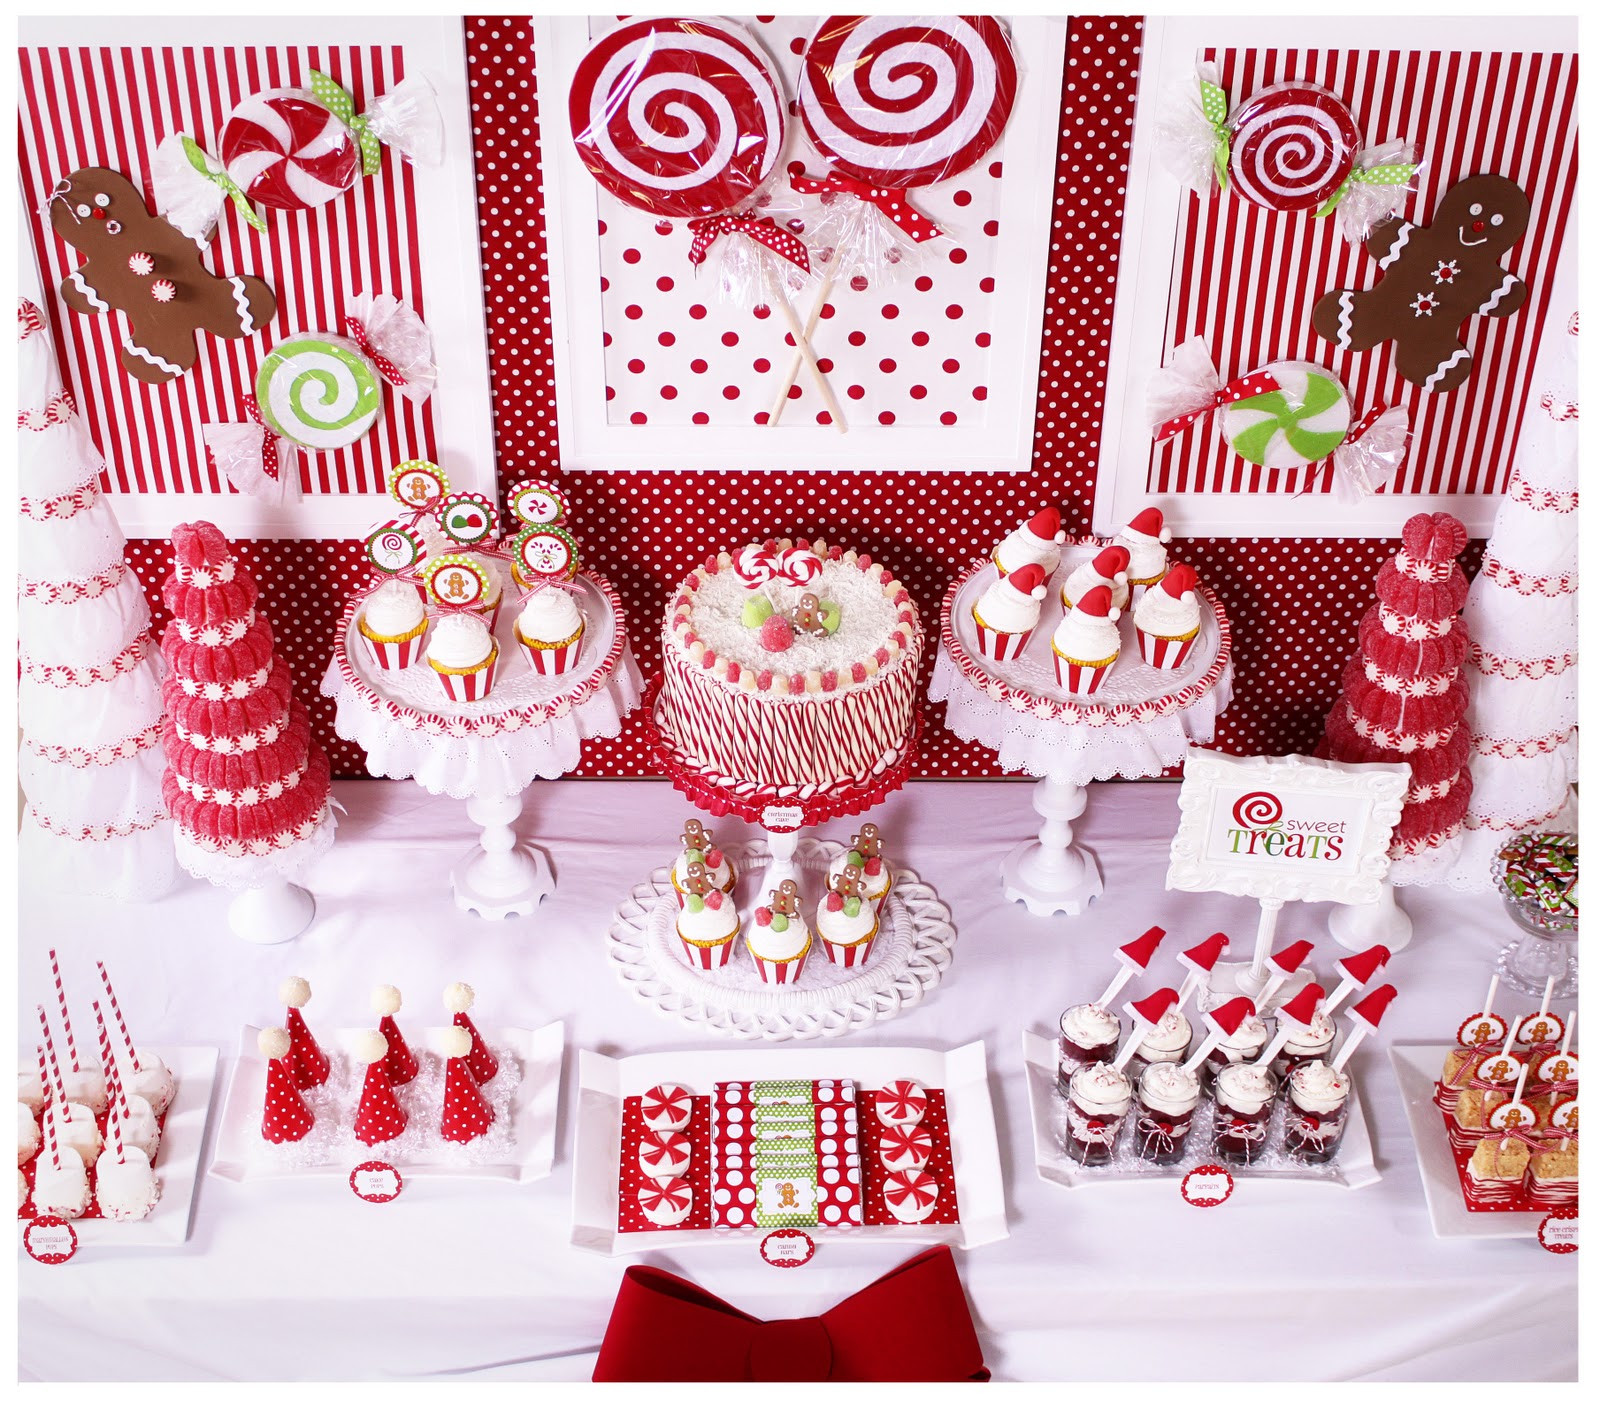 Holiday Party Decorating Ideas
 20 Christmas Party Decorations Ideas for This Year